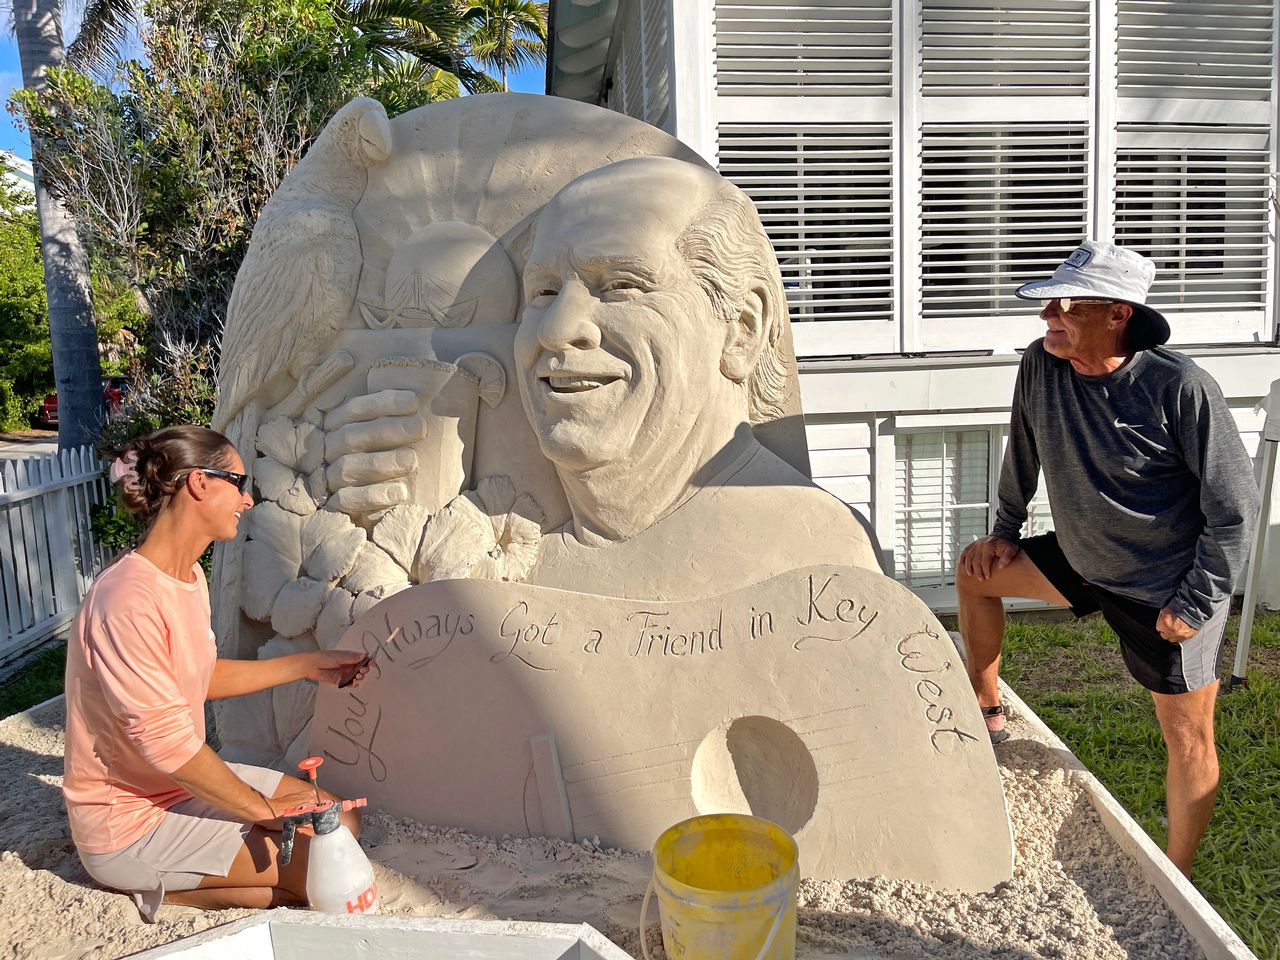 Sand sculptor Marianne van den Broek finishes a sculpture in Key West memorializing singer/songwriter Jimmy Buffett, while musician C.W. Colt looks on. Photo: Rob O'Neal